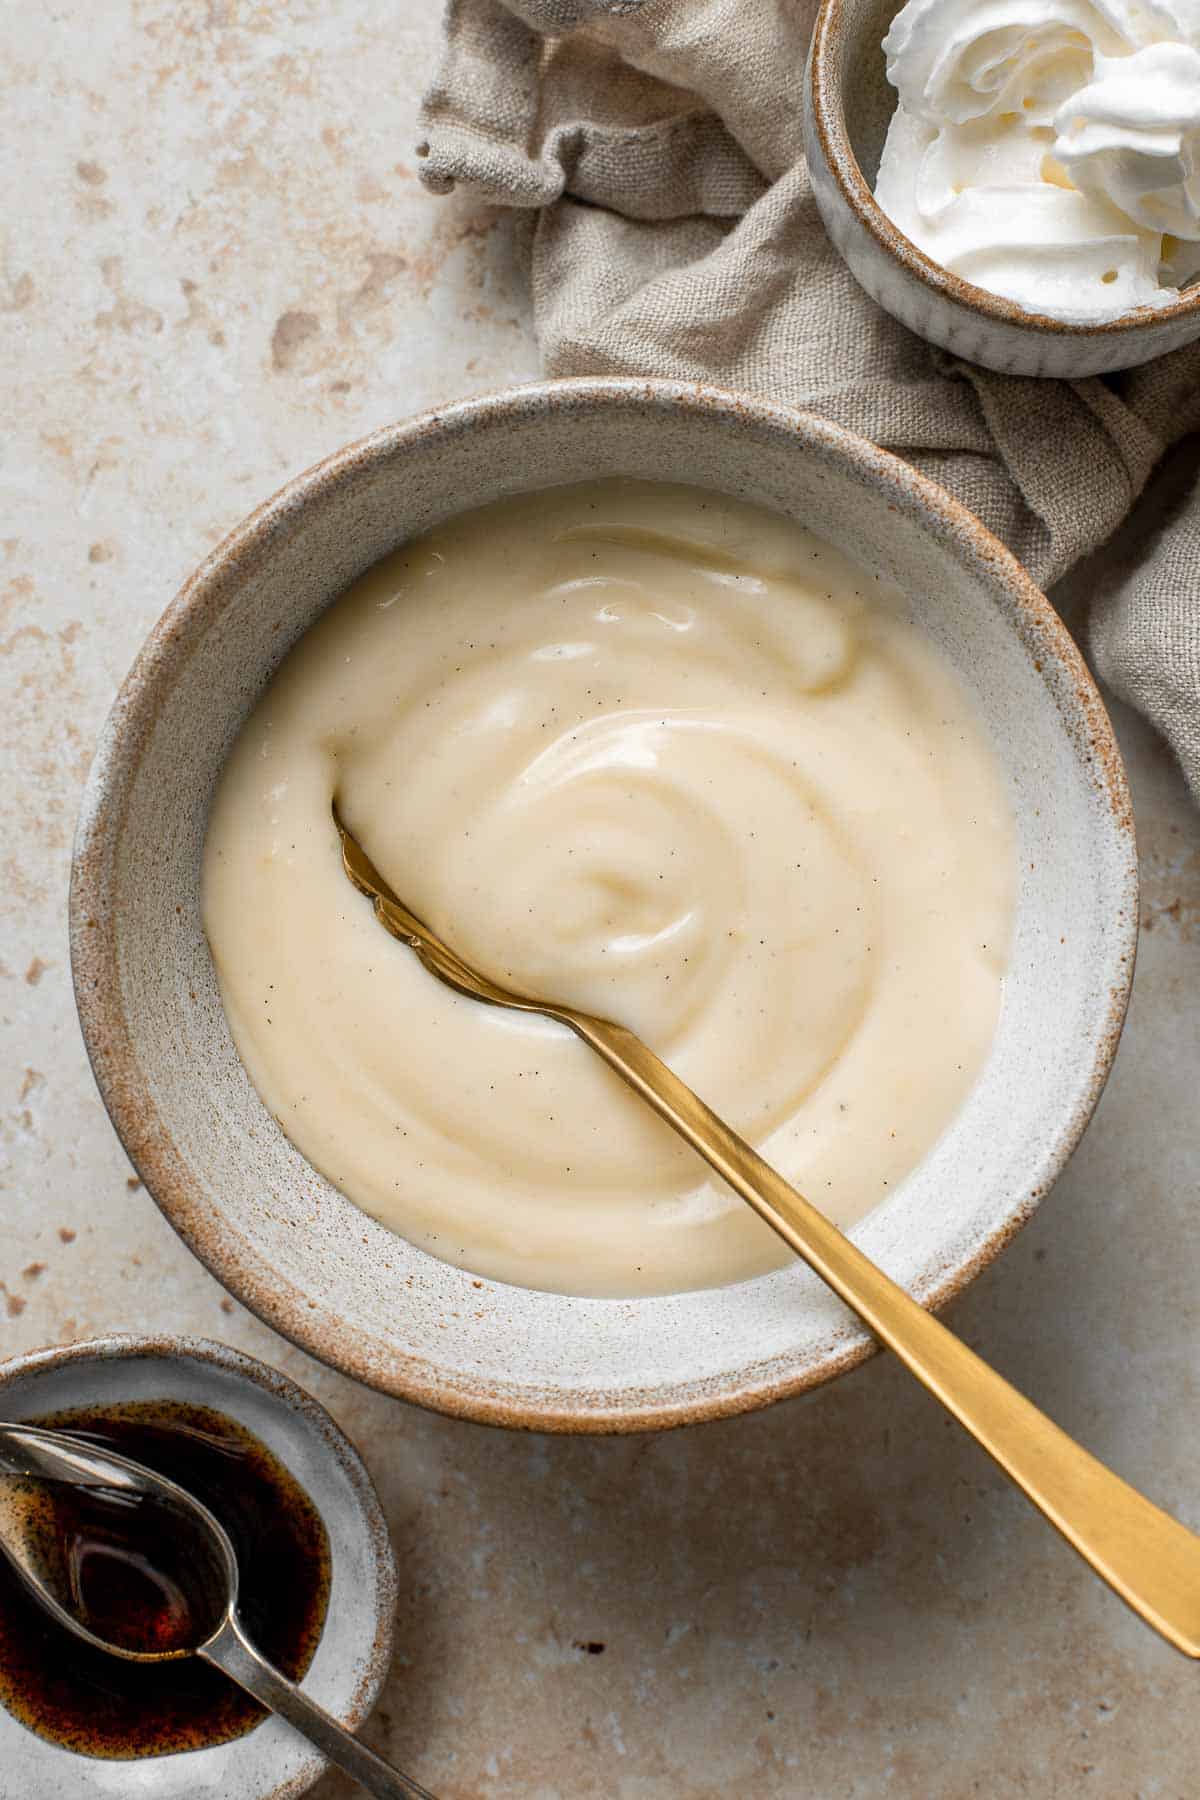 Homemade vanilla pudding is a creamy no bake dessert that you can make with 7 simple ingredients. So much better than boxed pudding mixes or pudding cups. | aheadofthyme.com